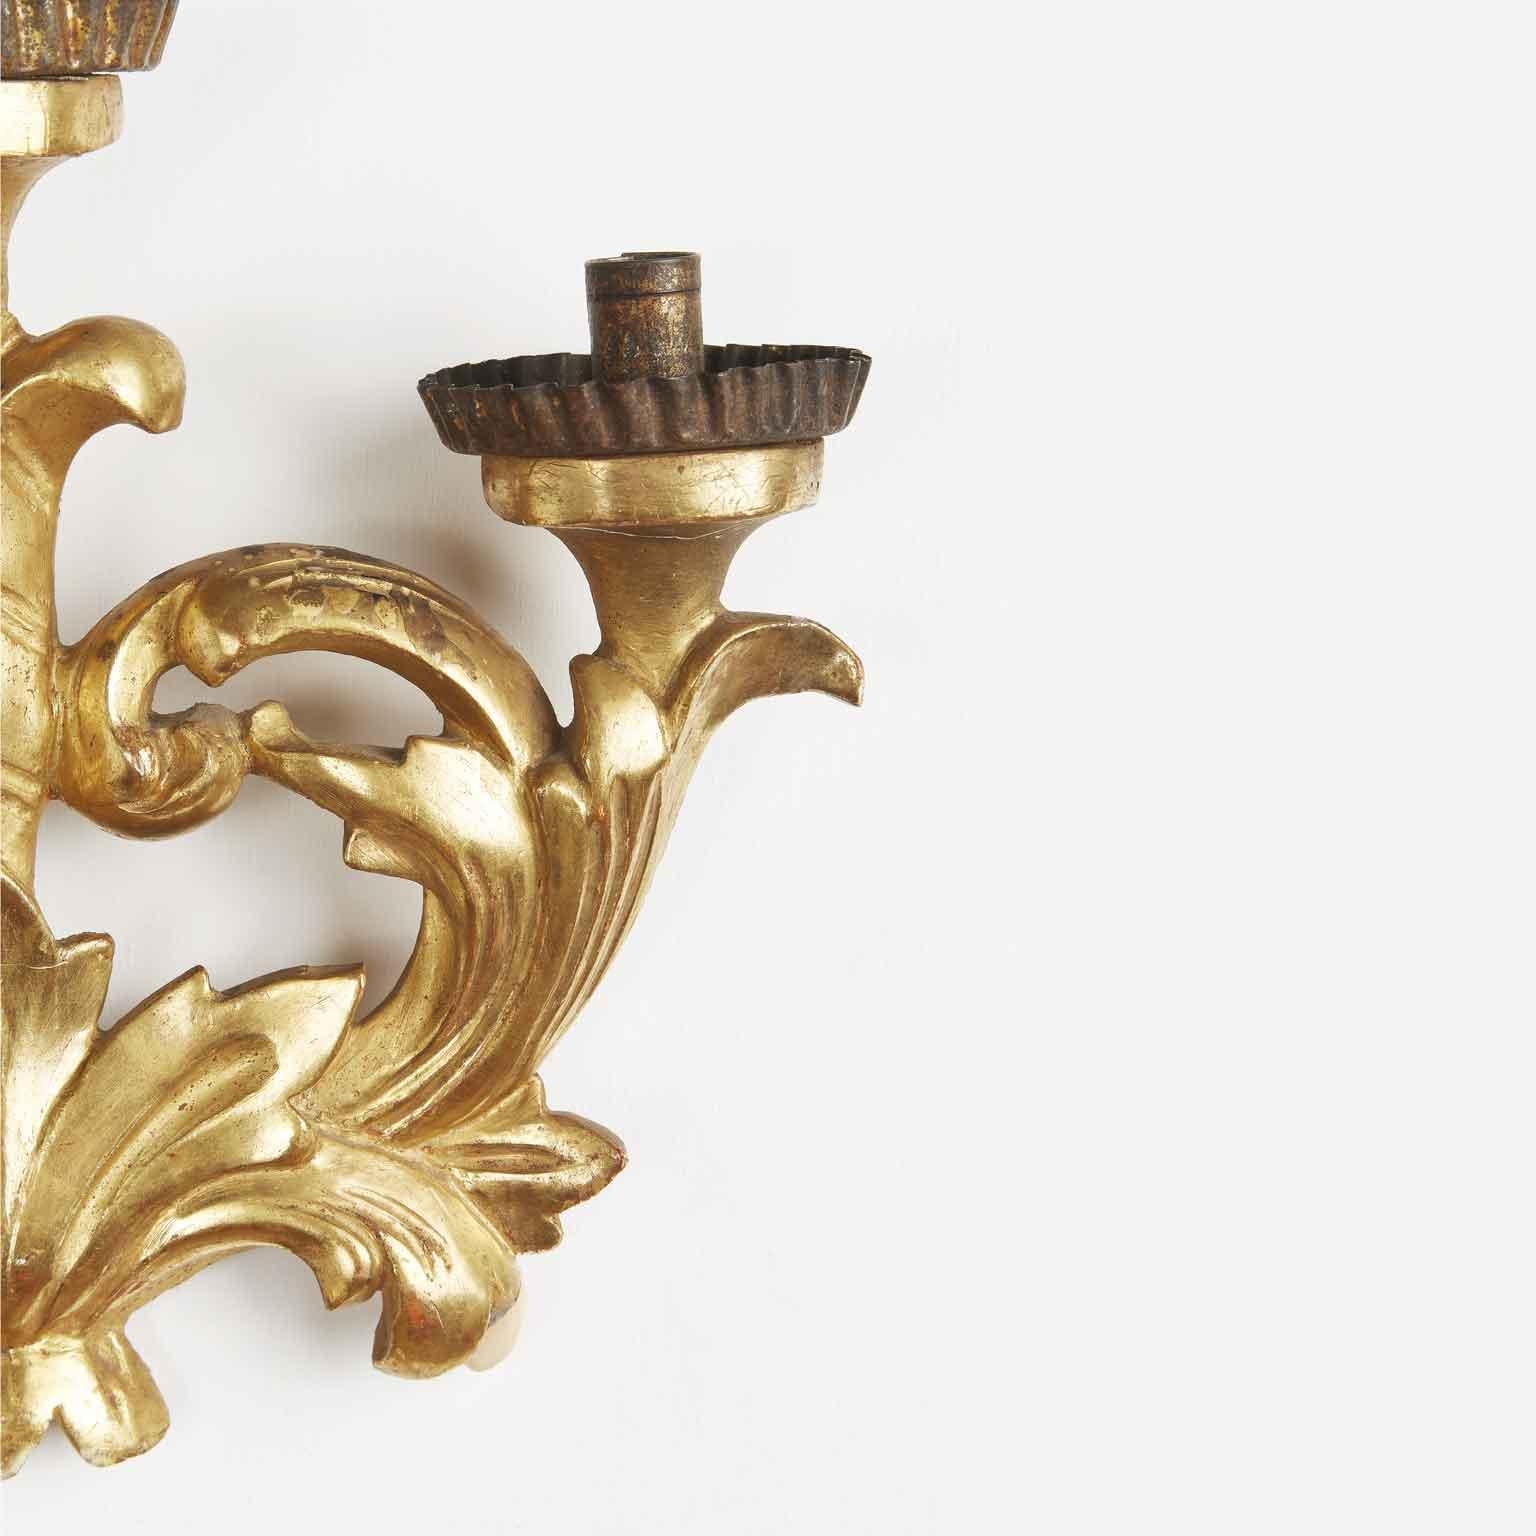 Pair of Italian Baroque Giltwood Wall Candelabra 19th Century Carved Sconces For Sale 4